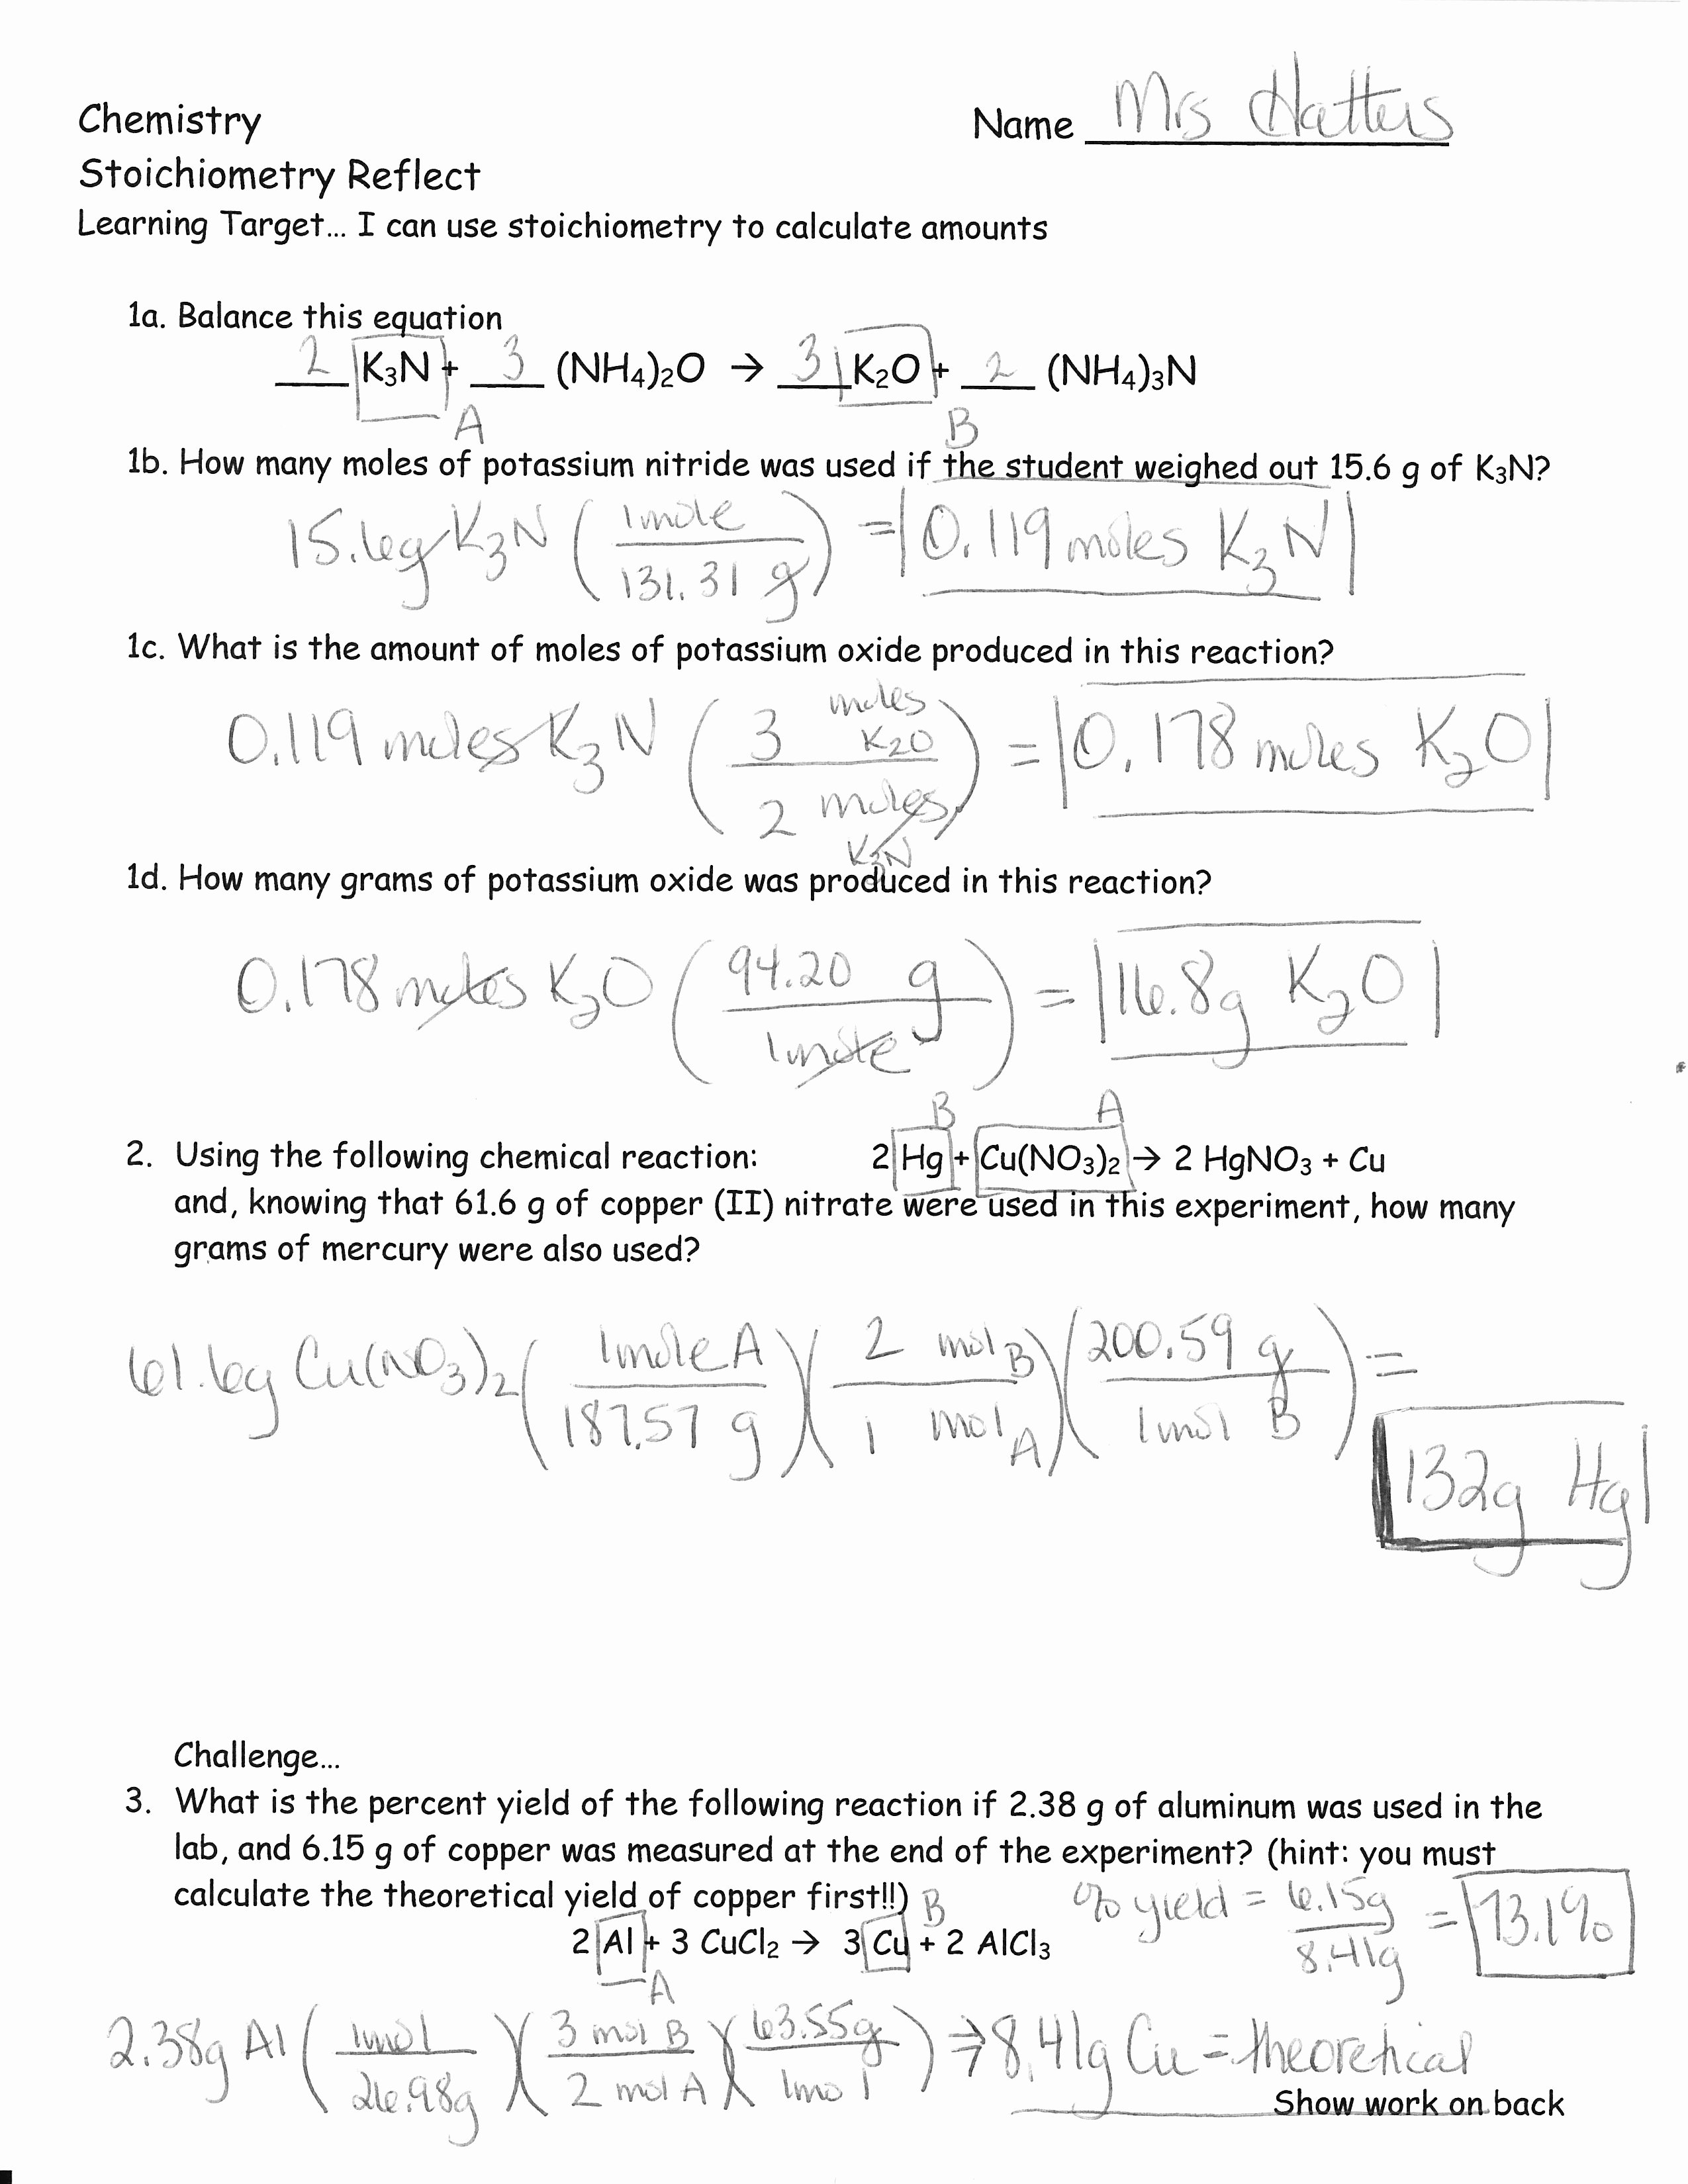 Stoichiometry Problems Worksheet Answers Luxury Announcements Stoichiometry Test Review Answer Keys